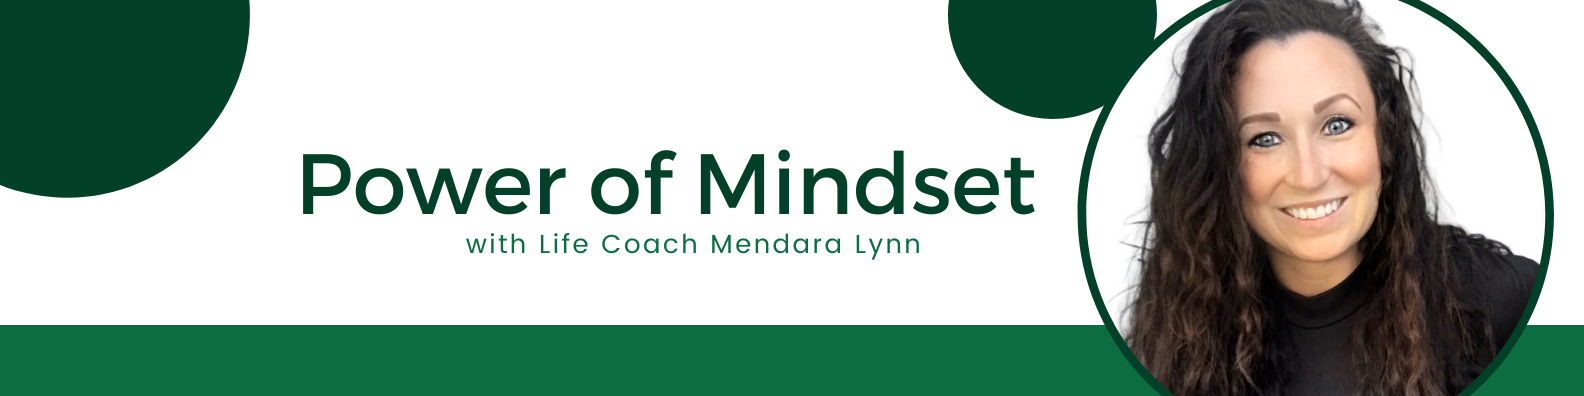 Power of Mindset Online personal development course